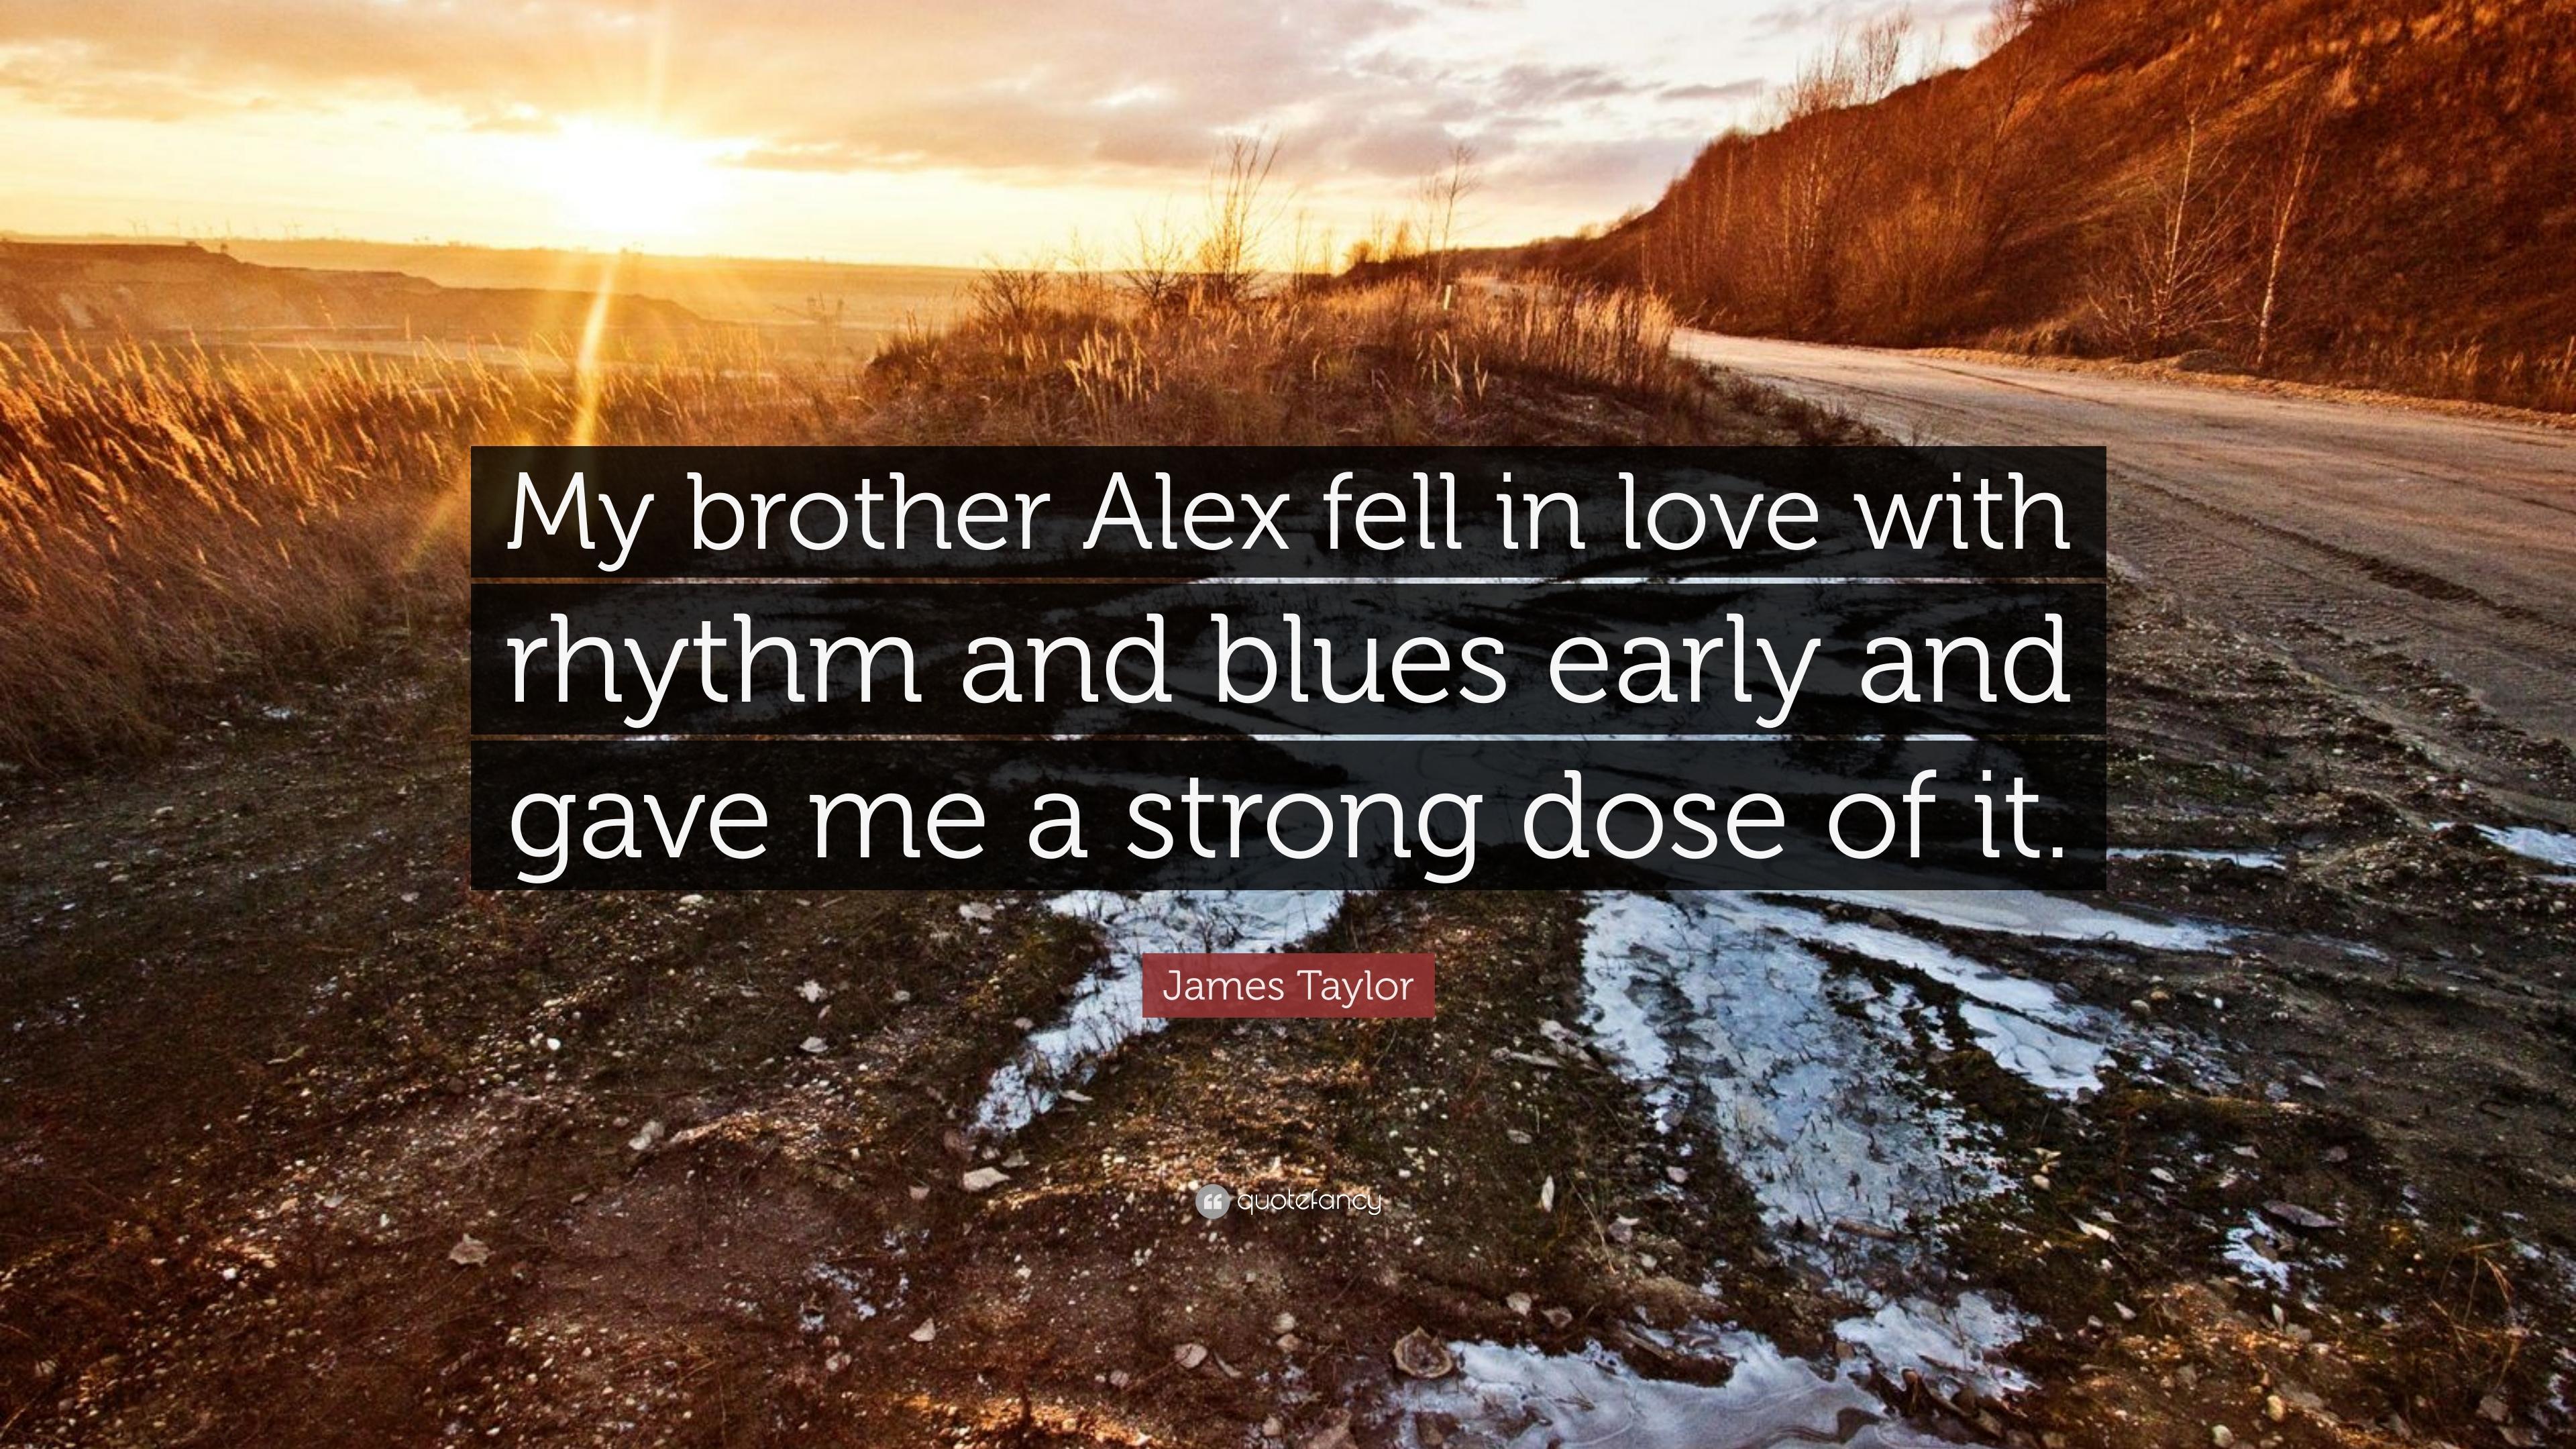 James Taylor Quote: “My brother Alex fell in love with rhythm